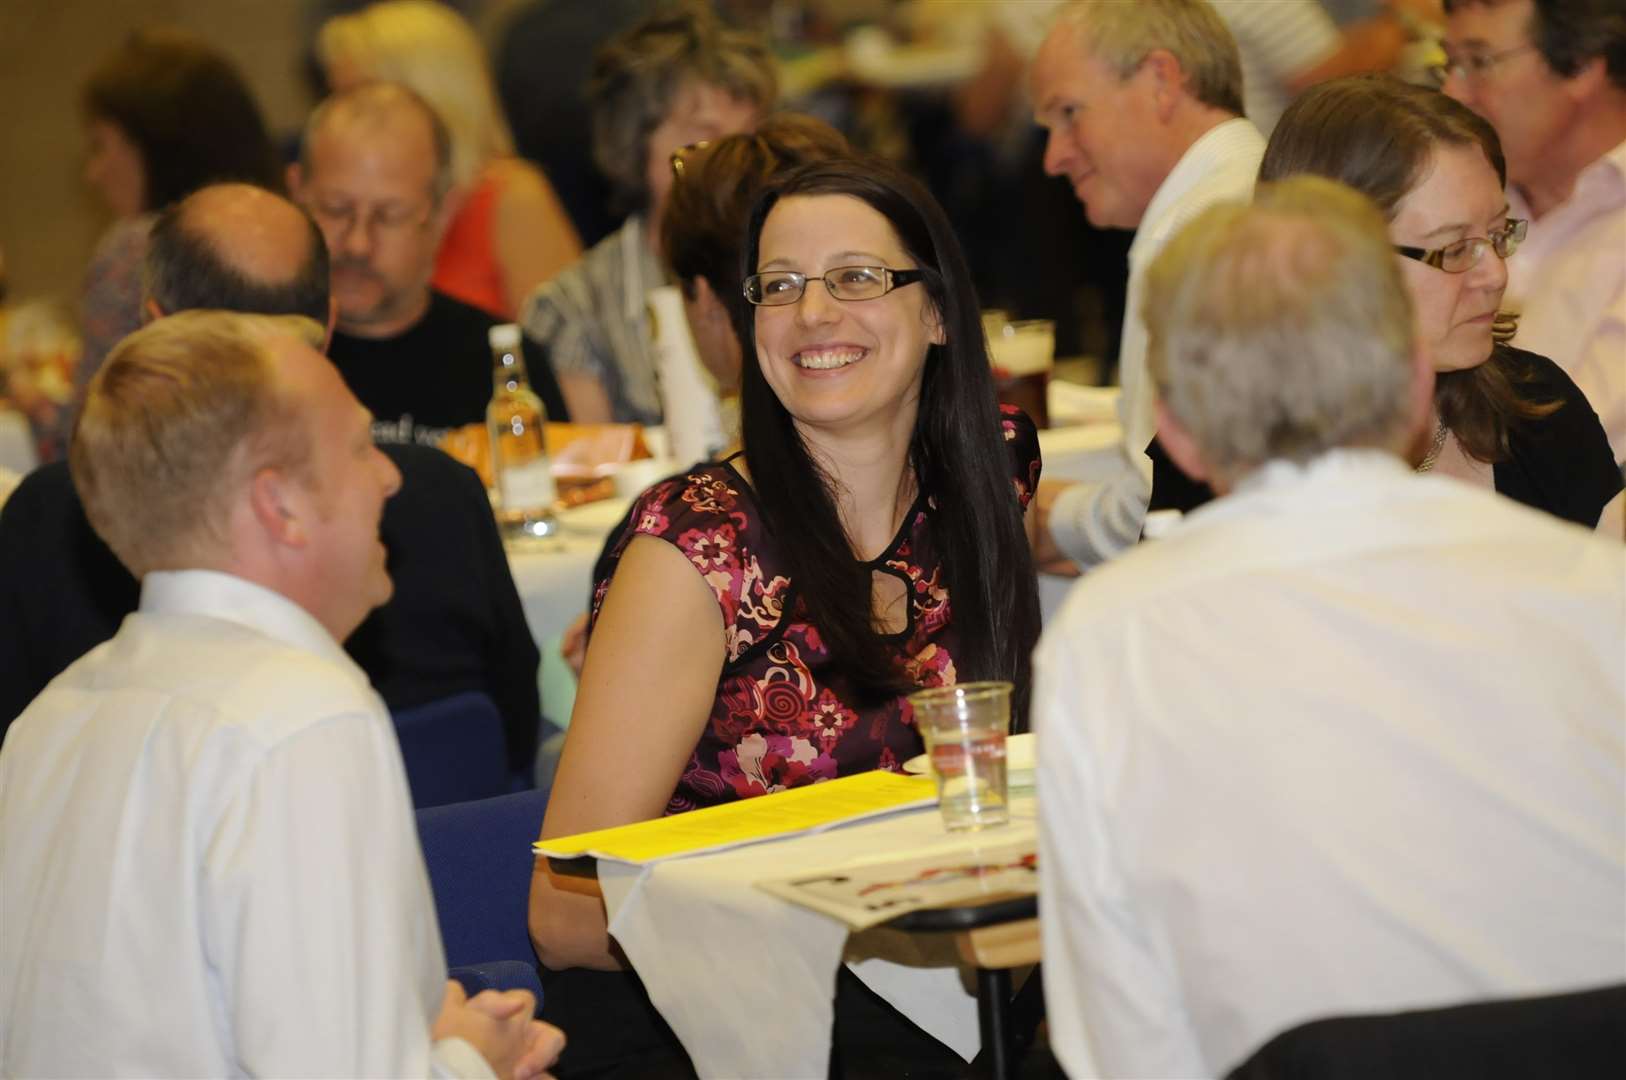 Fun for all at the KM Big Charity Quiz.